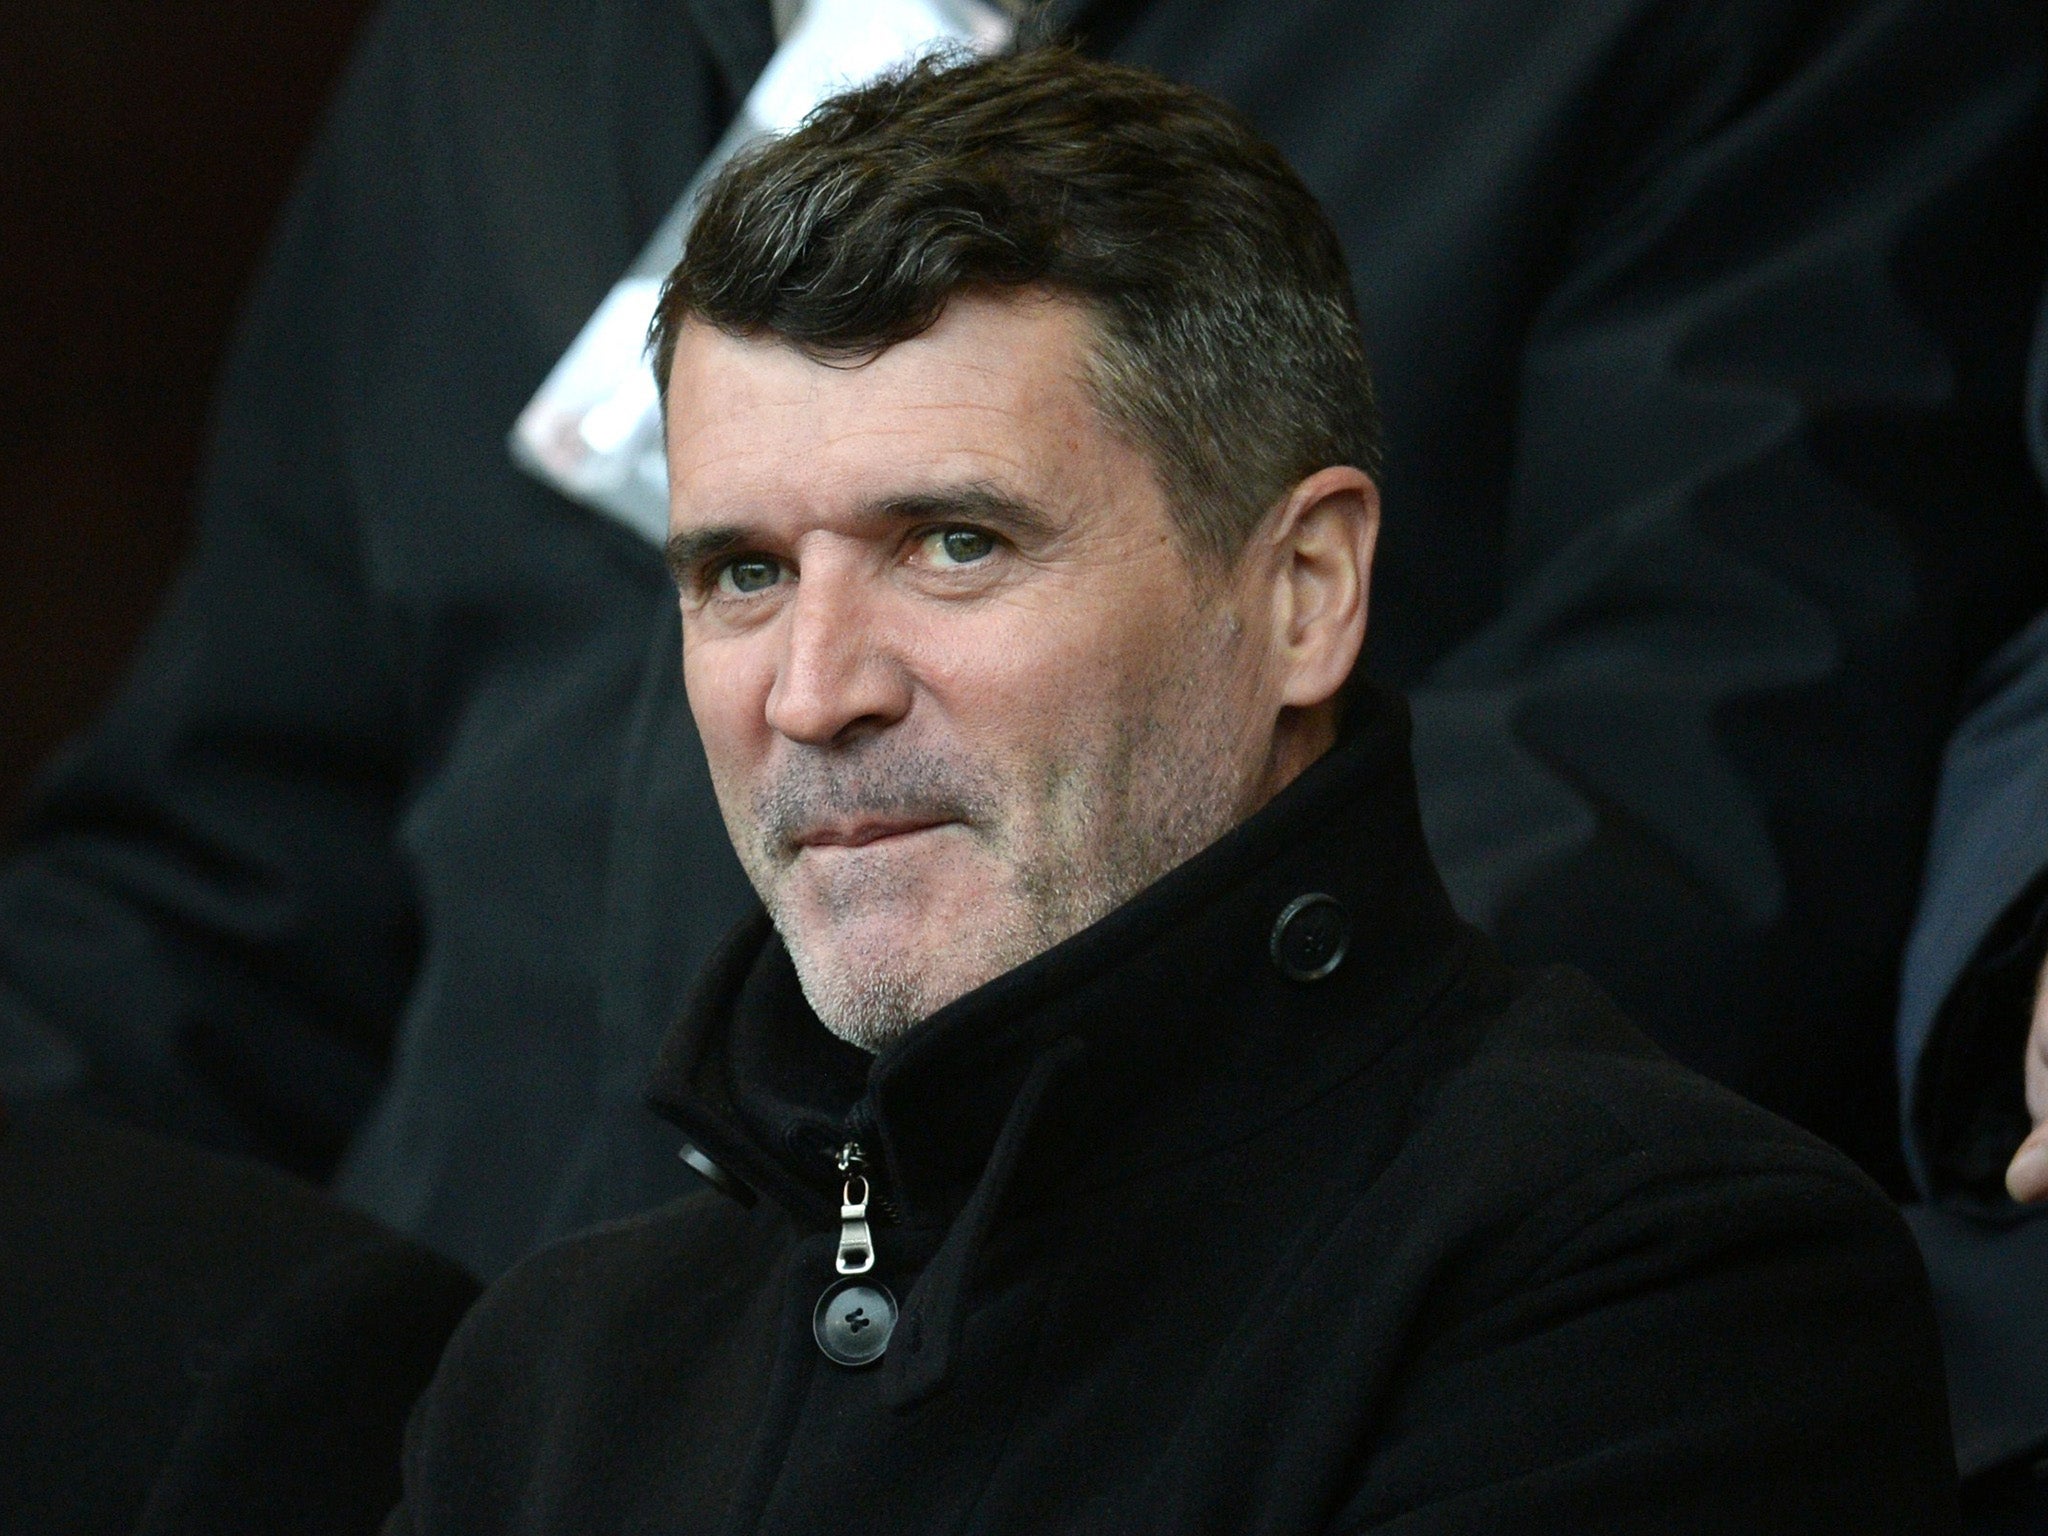 Roy Keane called Manchester United's performance 'poor' and says they must strengthen